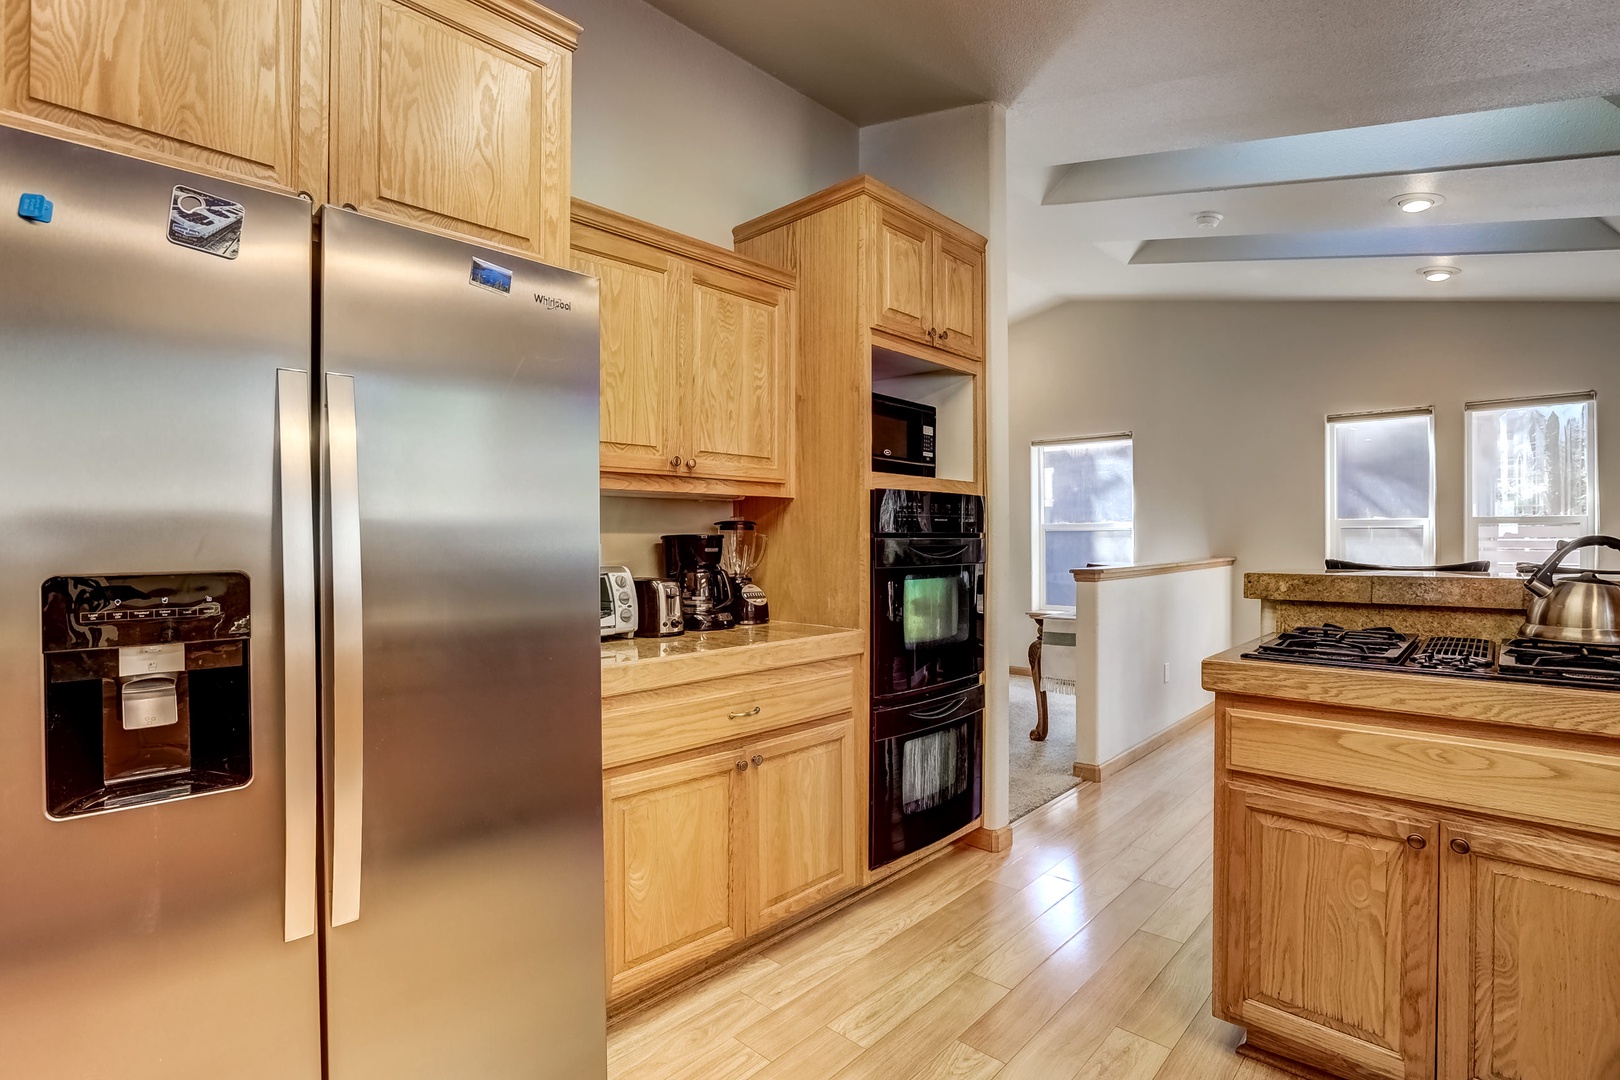 Kitchen with drip coffee maker, toaster oven, blender, waffle maker, slow cooker, and more!